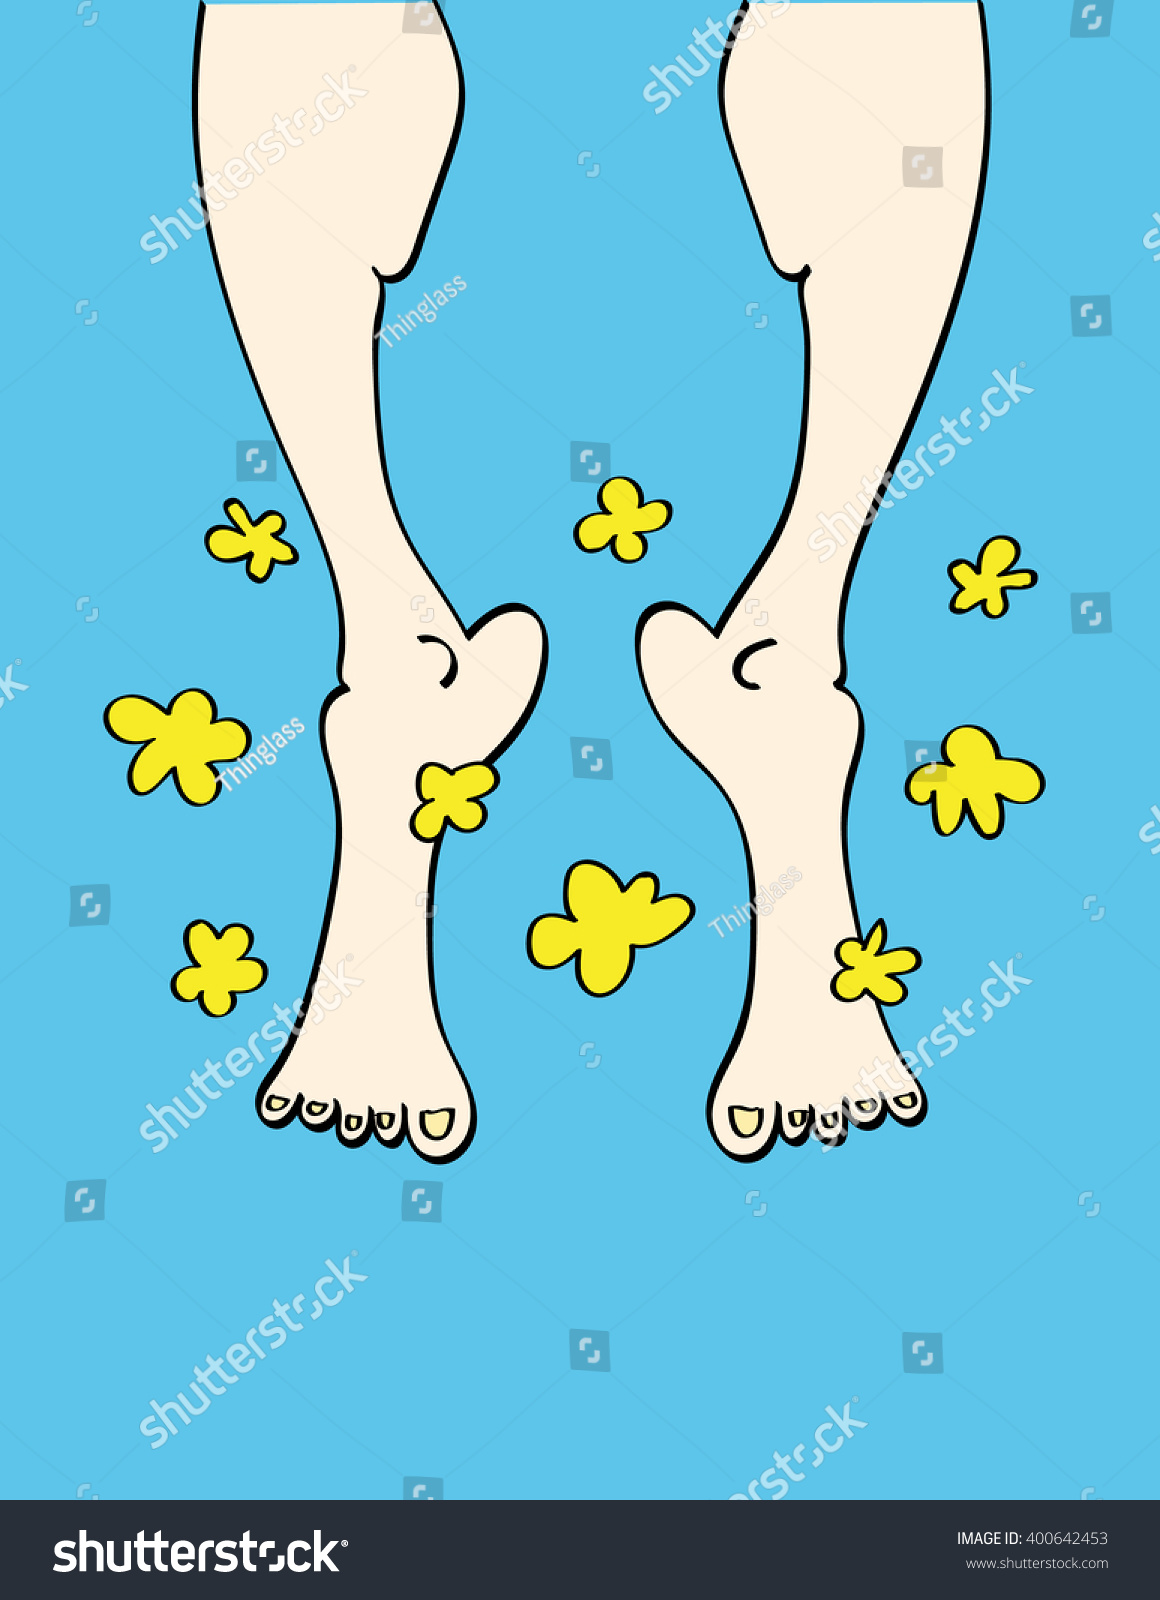 SVG of A pair of feet belonging to a man or woman with cheesy clouds of smelly vapour coming off them svg